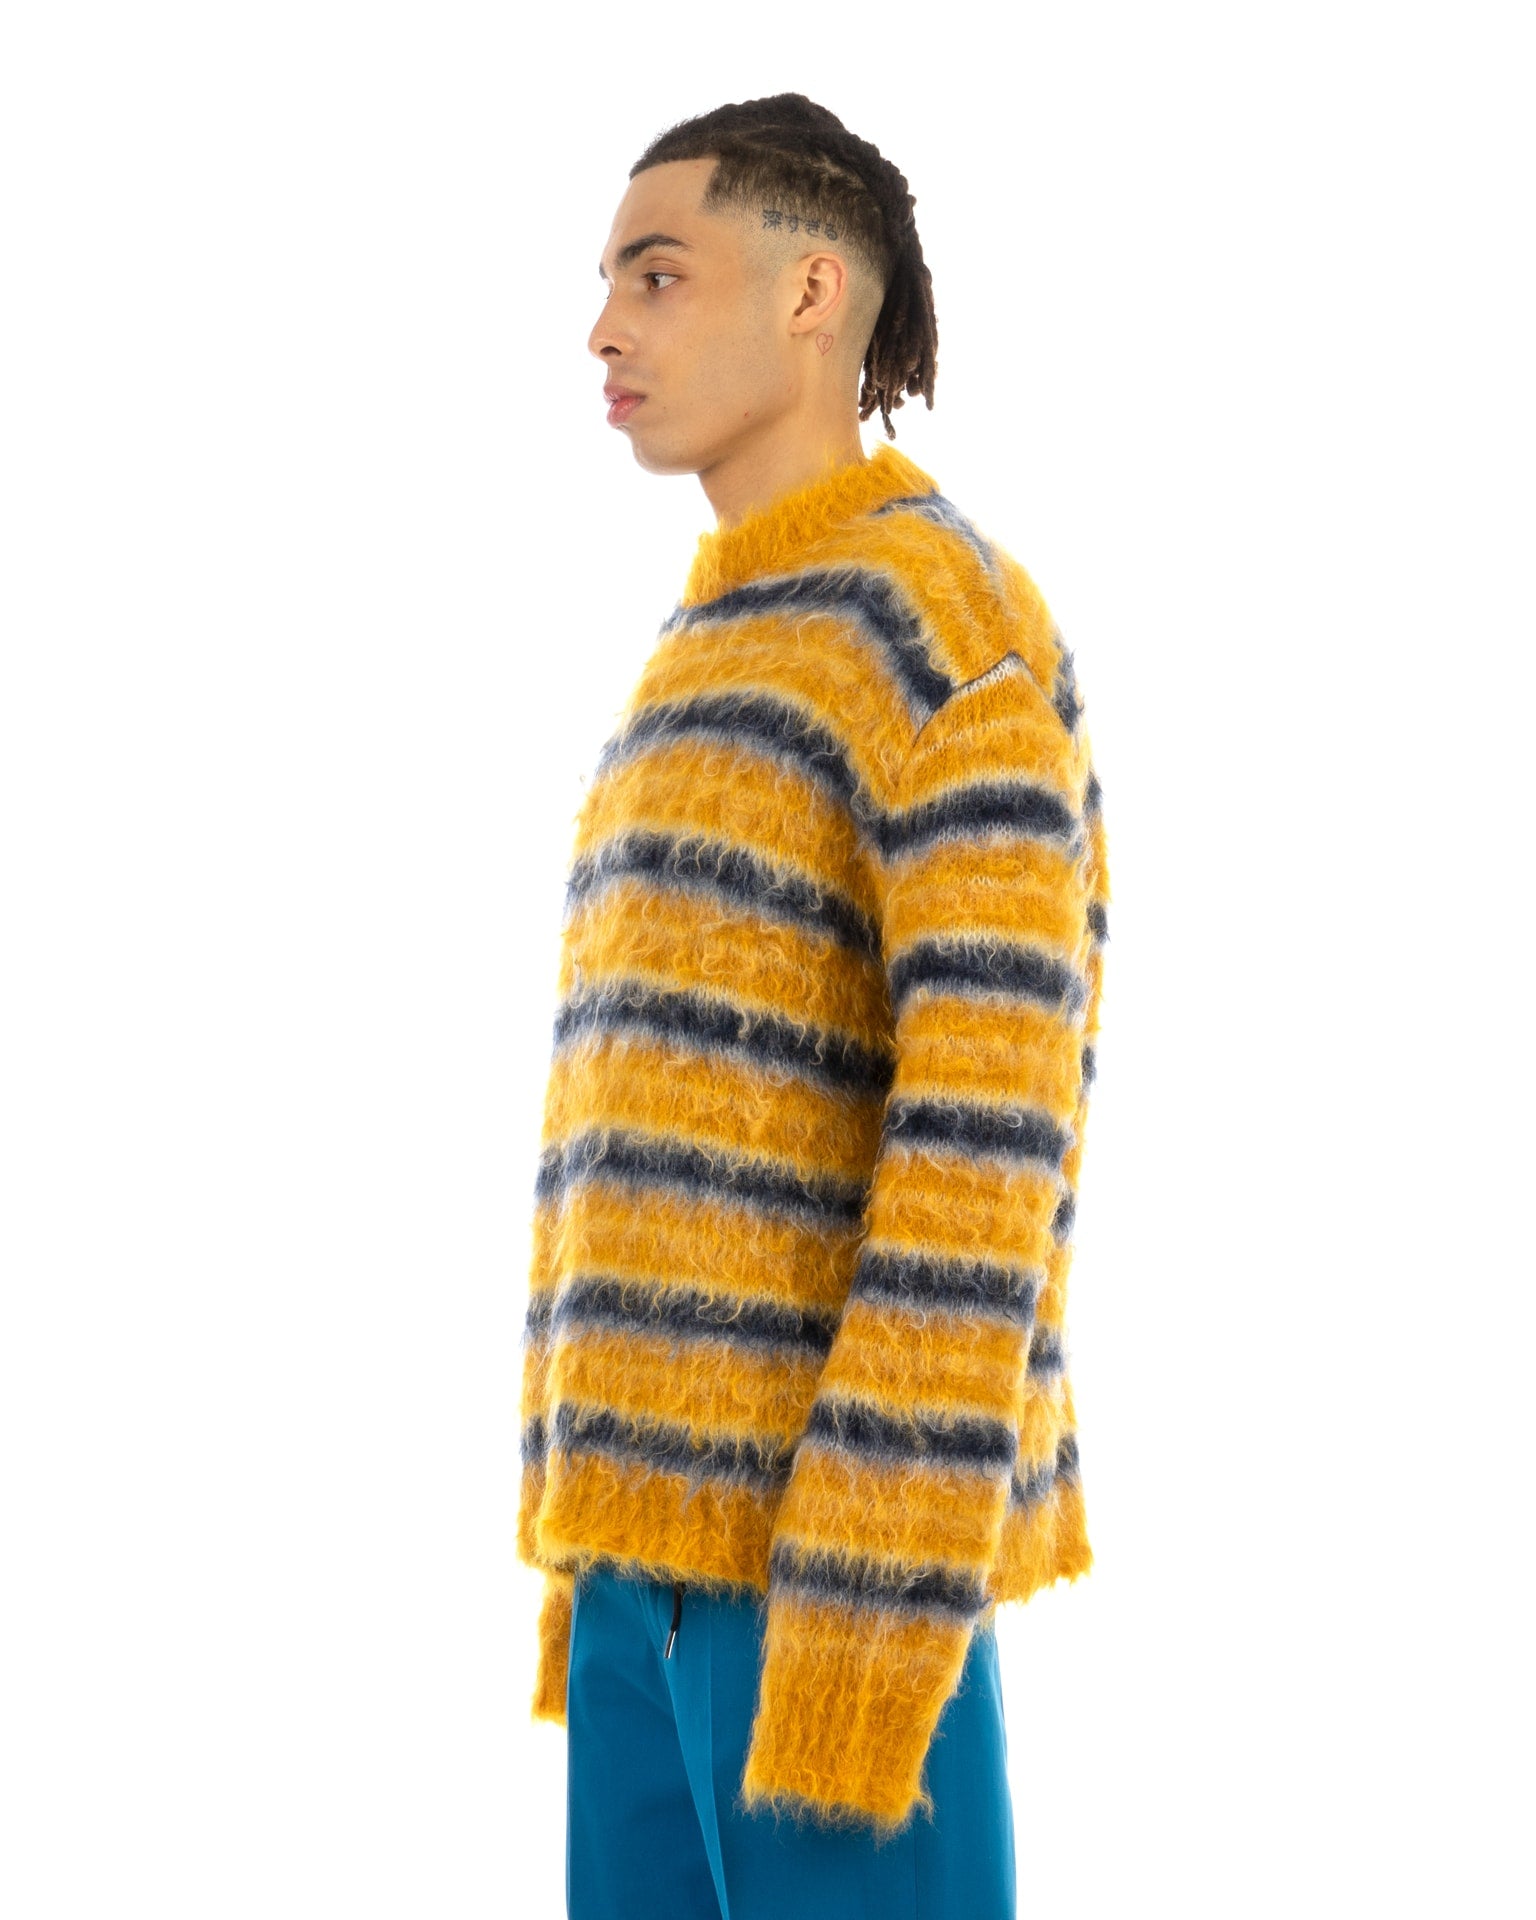 Marni | Iconic Groovy Striped Sweater Sunflower | Concrete